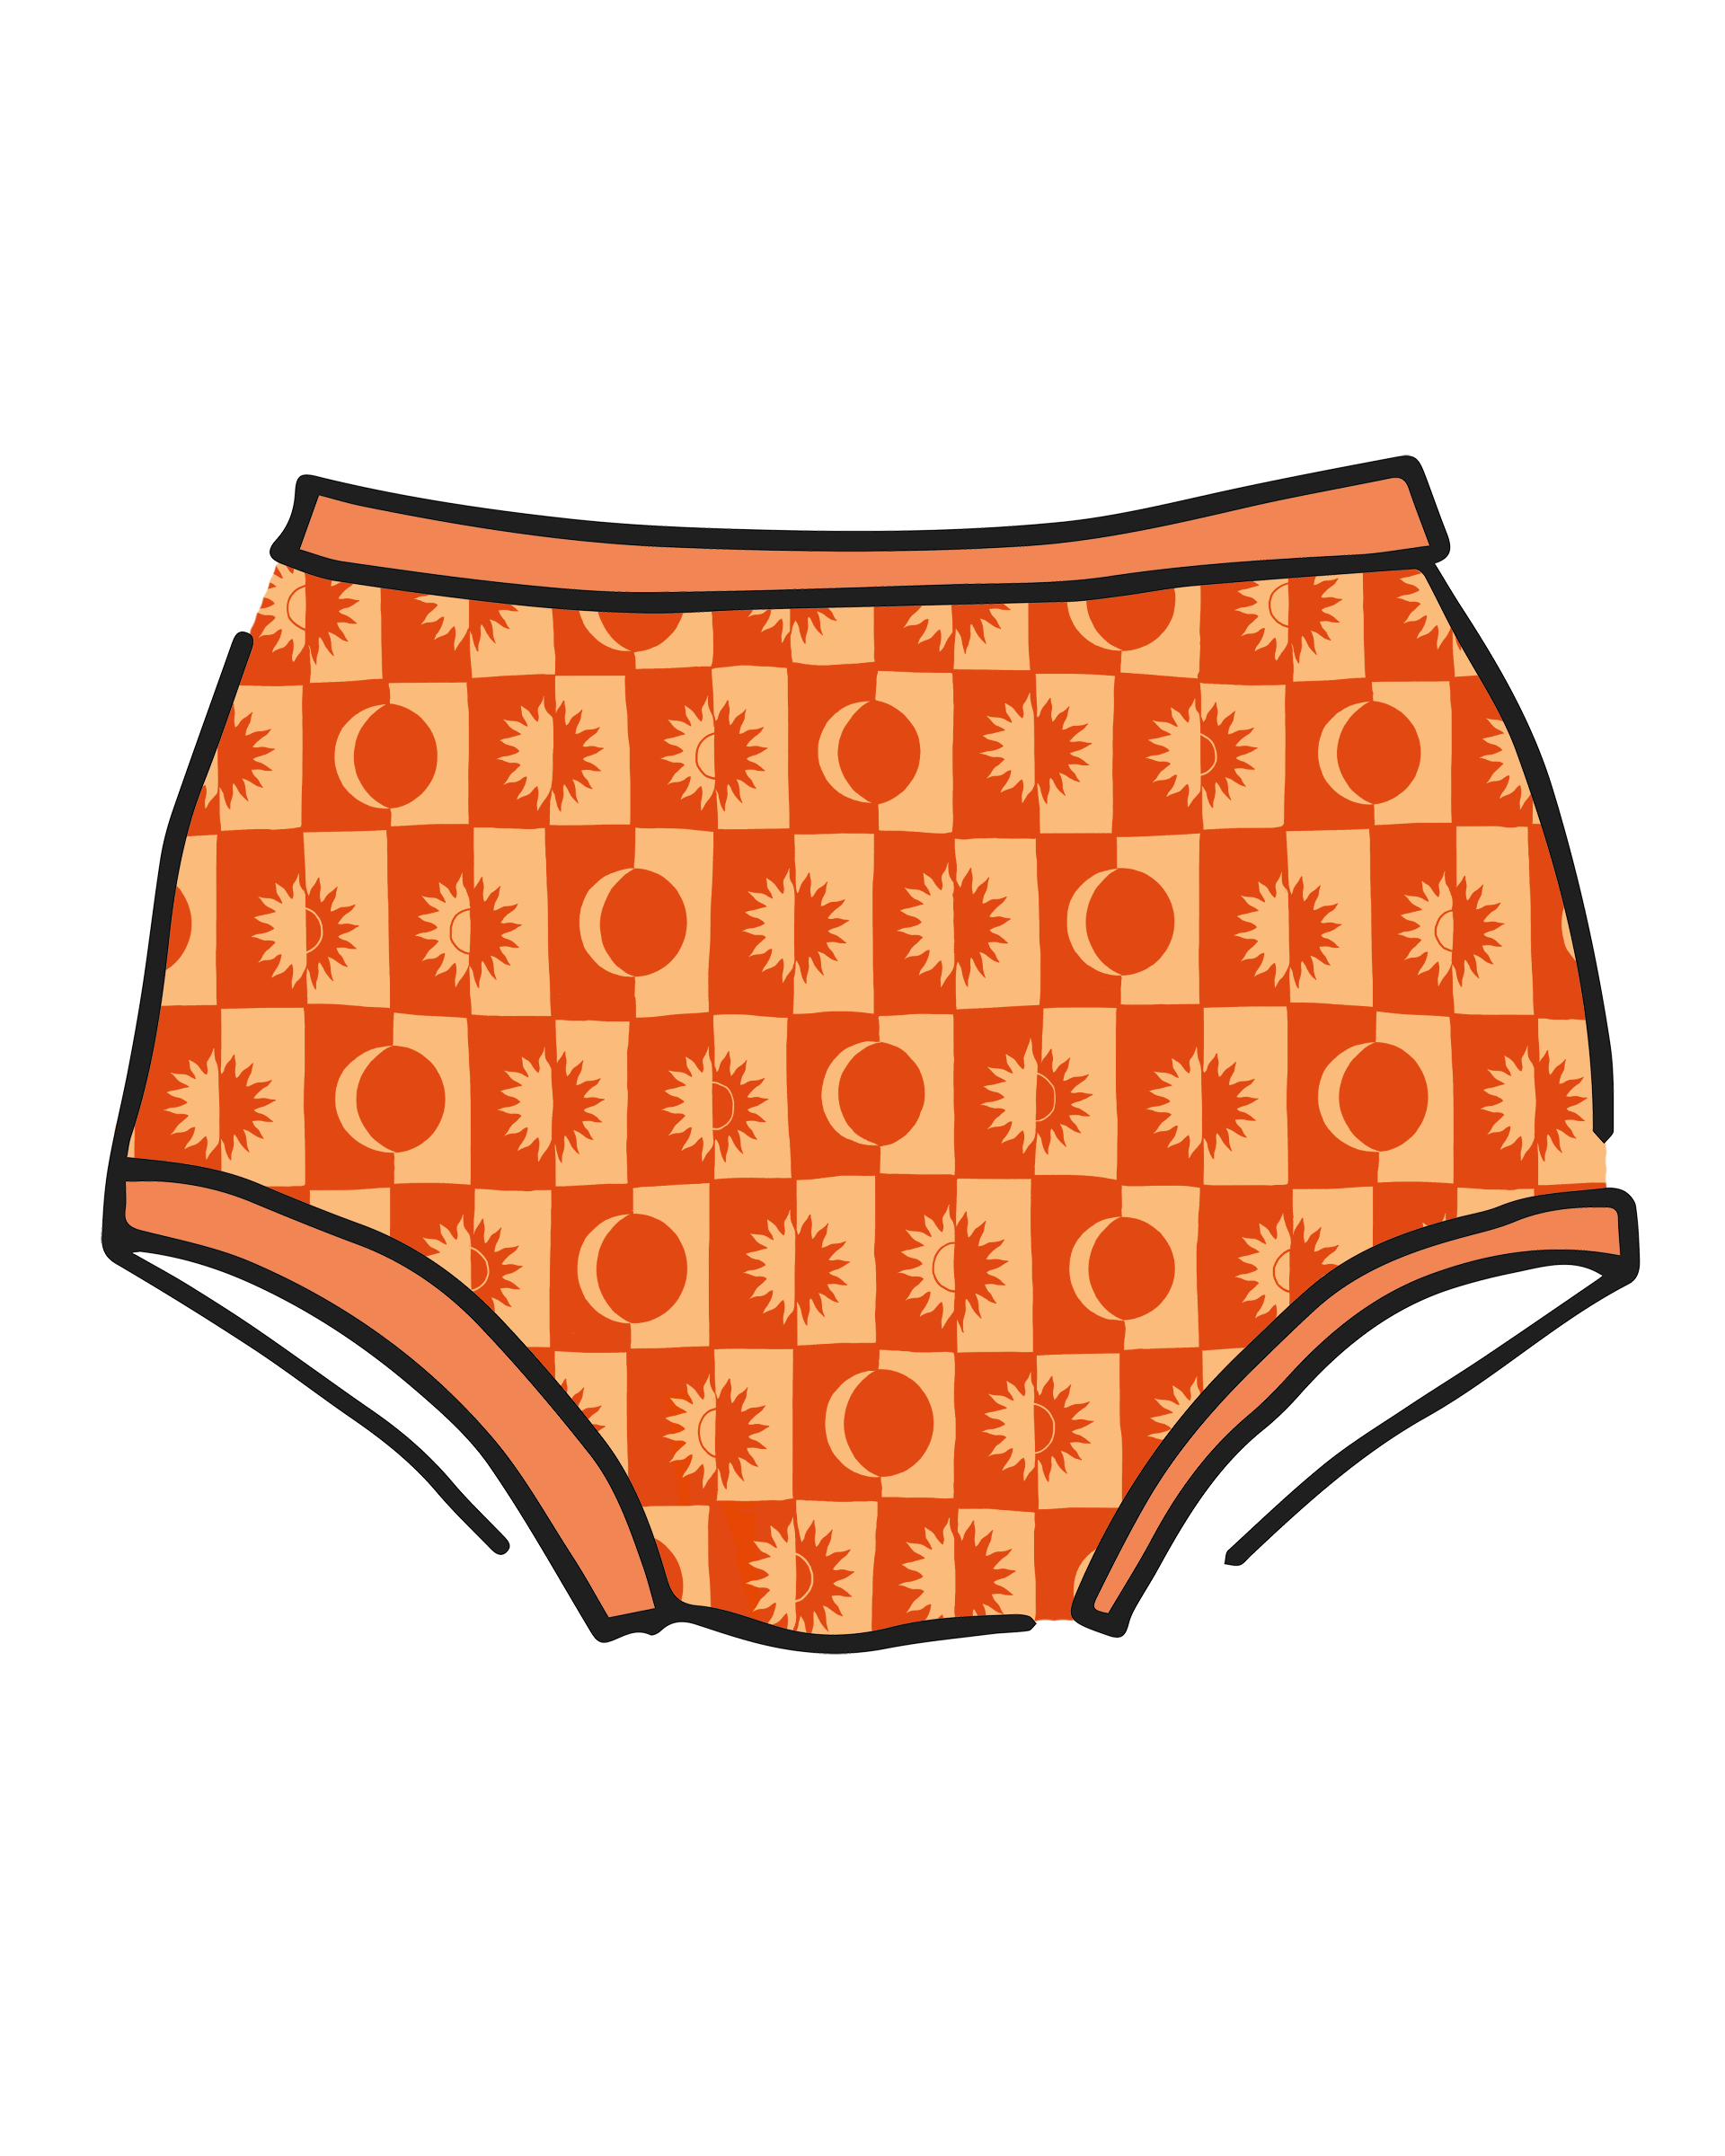 Drawing of Thunderpants Original style underwear in Autumn Equinox print.